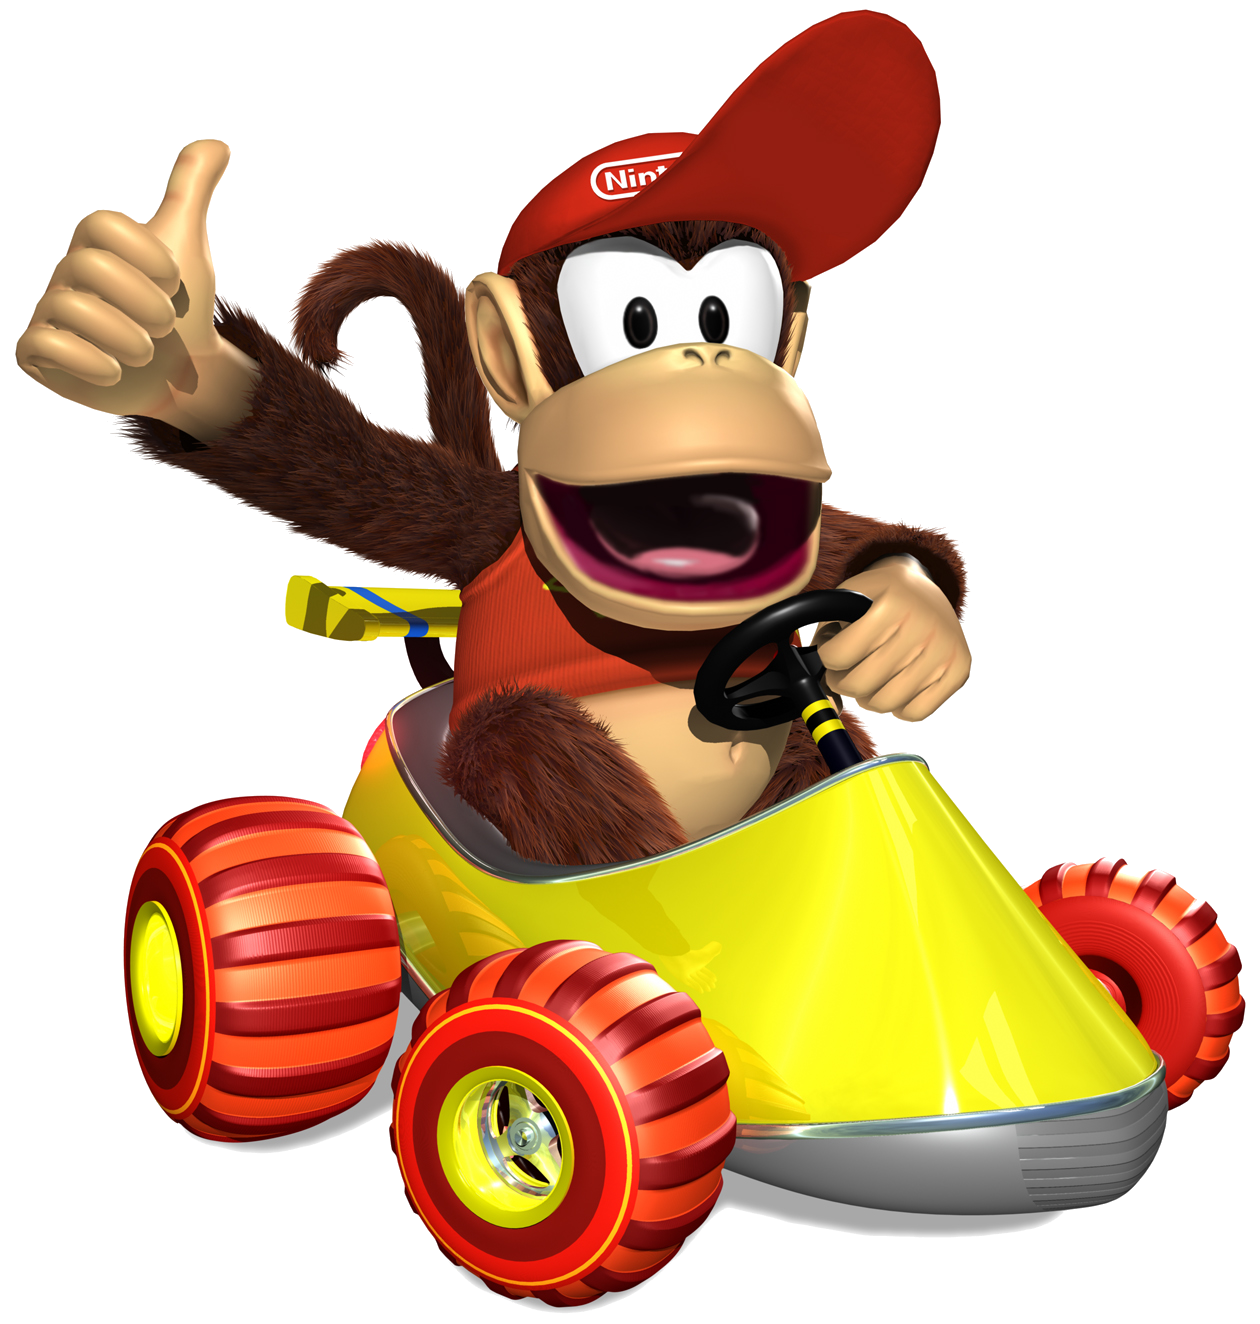 Toy Kart Wii Kong Mario Diddy Racing PNG Image